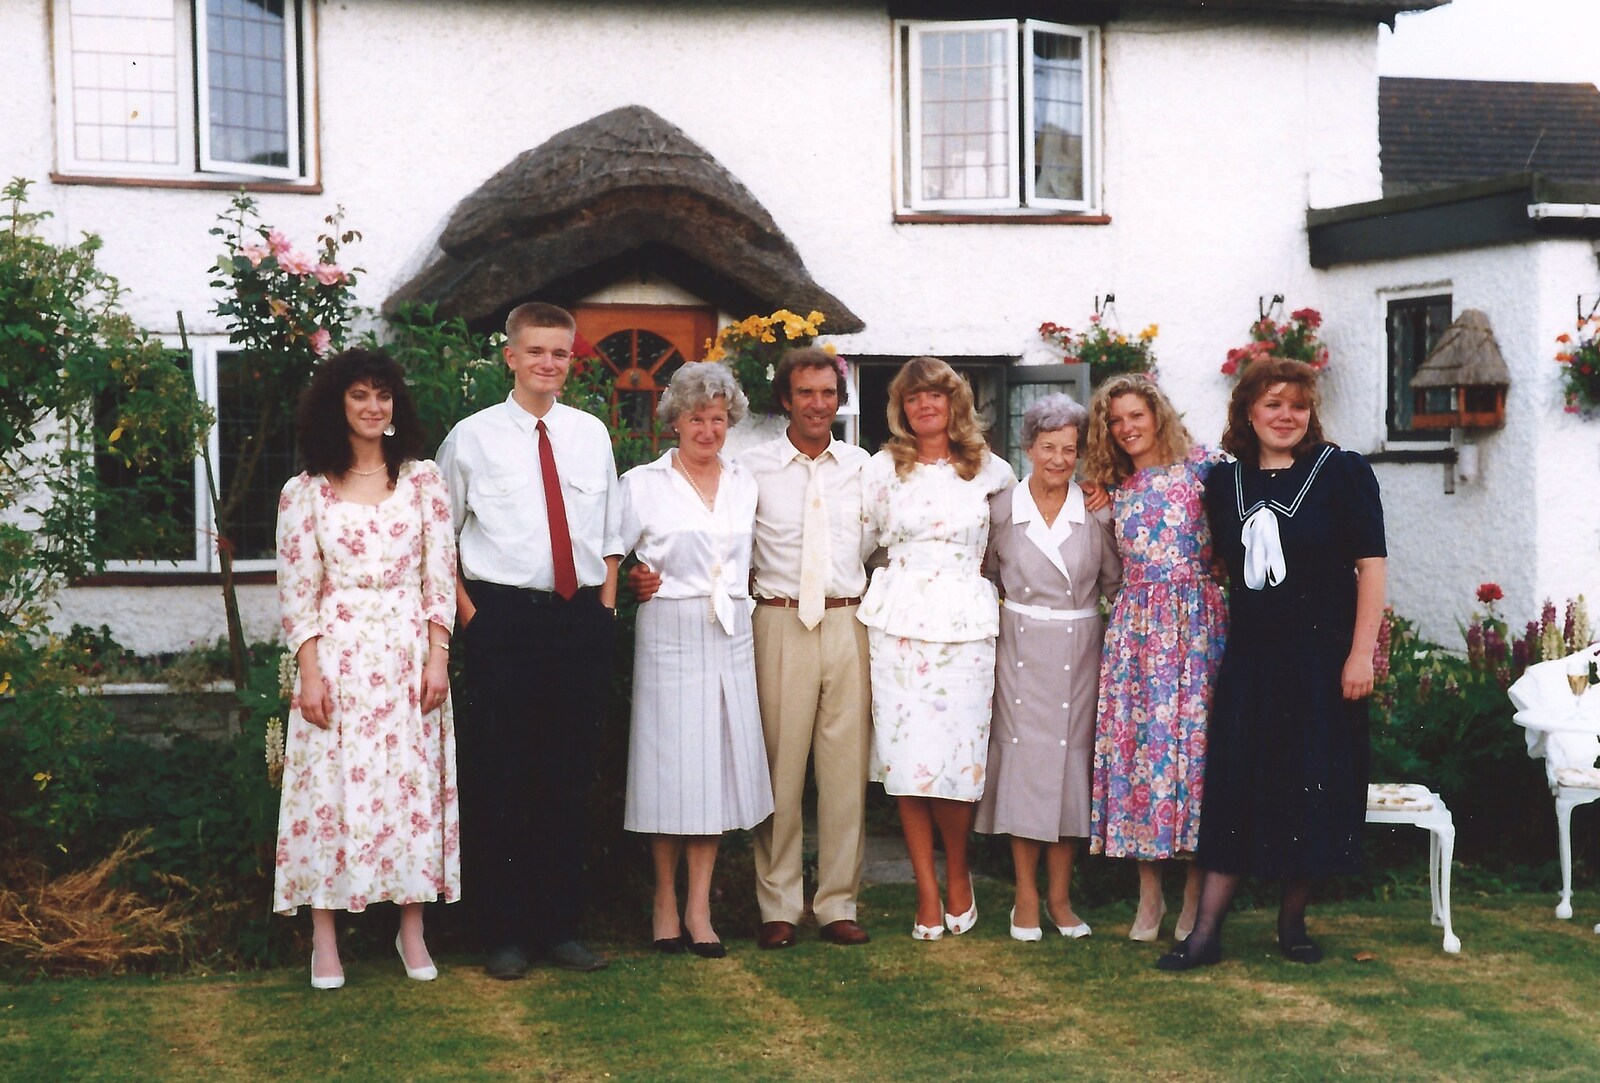 Another family group photo from Mother and Mike's Wedding Reception, Bransgore, Dorset - 20th August 1988